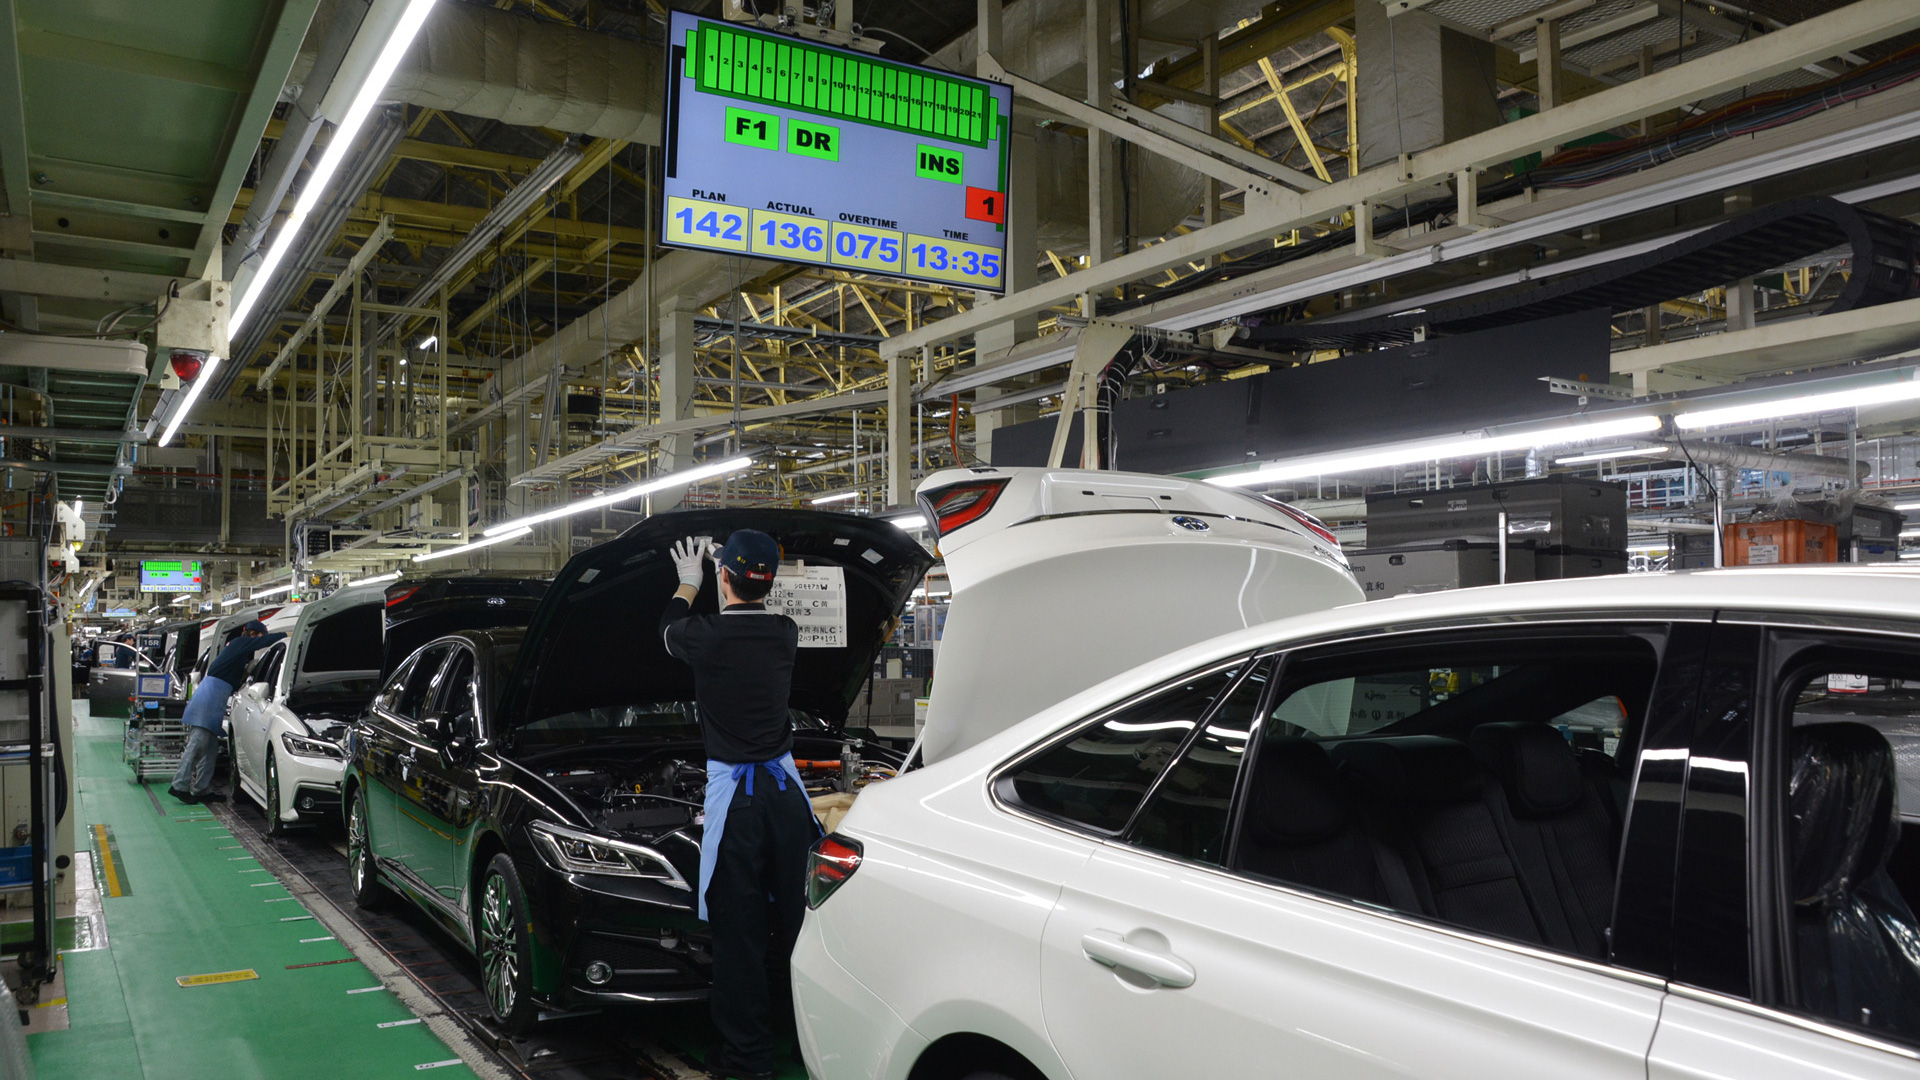 Server With Full Hard Drive Shuts Down Every Toyota Plant in Japan